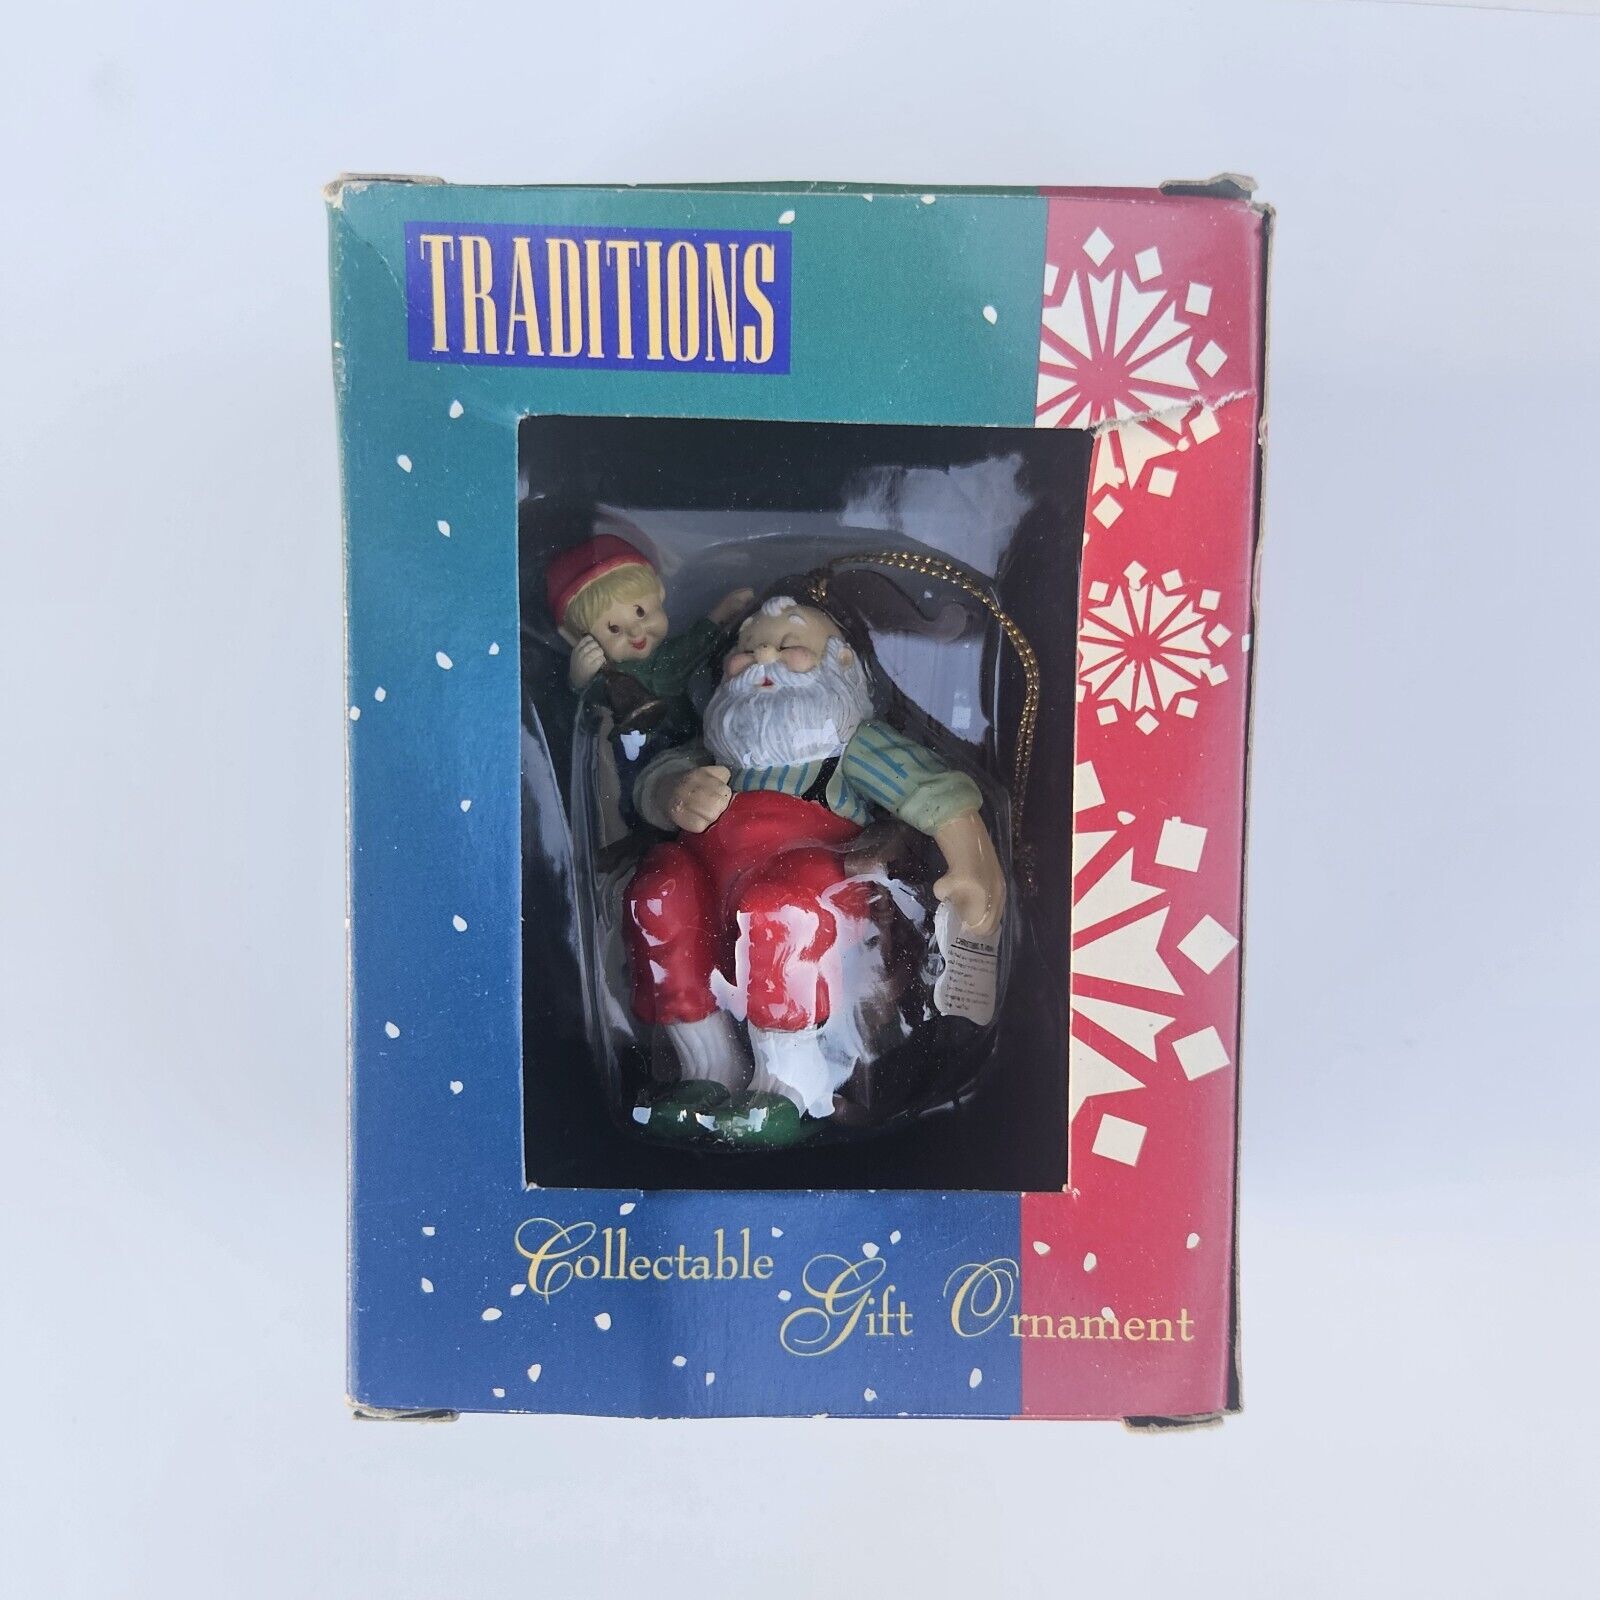 Vintage Traditions Sleeping Santa in Rocker Collectible Gift Christmas Ornament